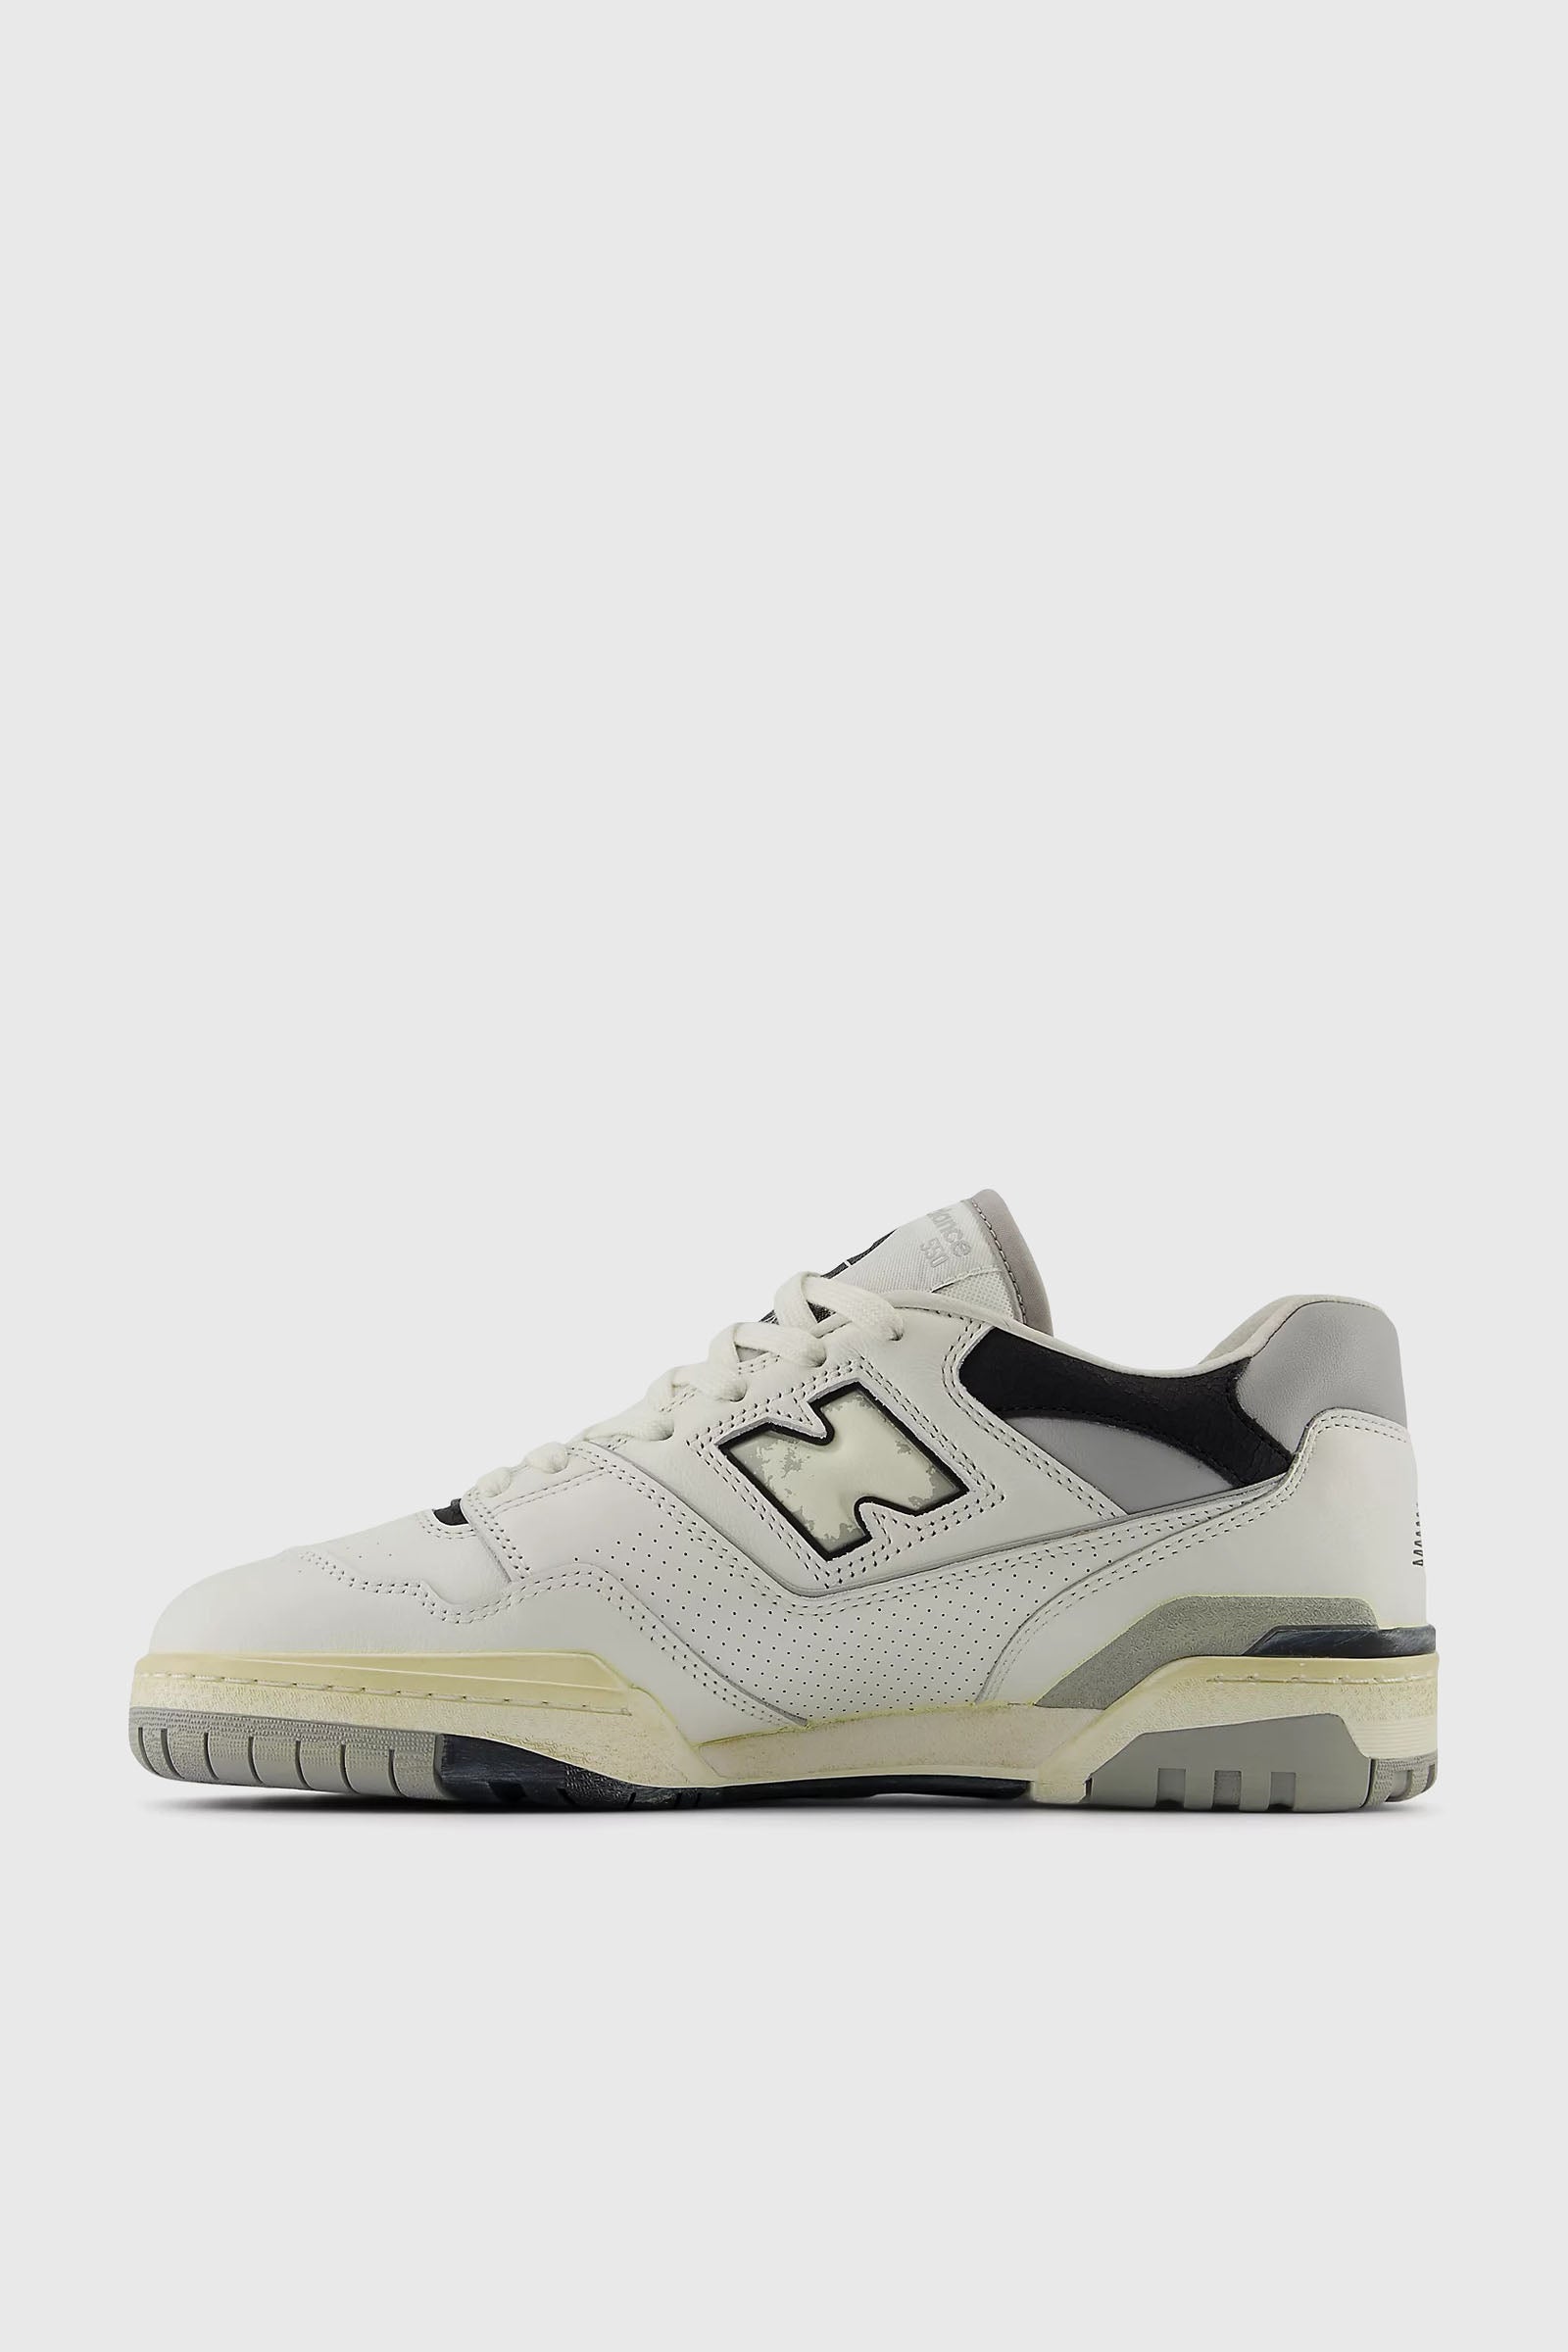 H1 Title: New Balance Sneakers 550 Synthetic White/Grey - 6